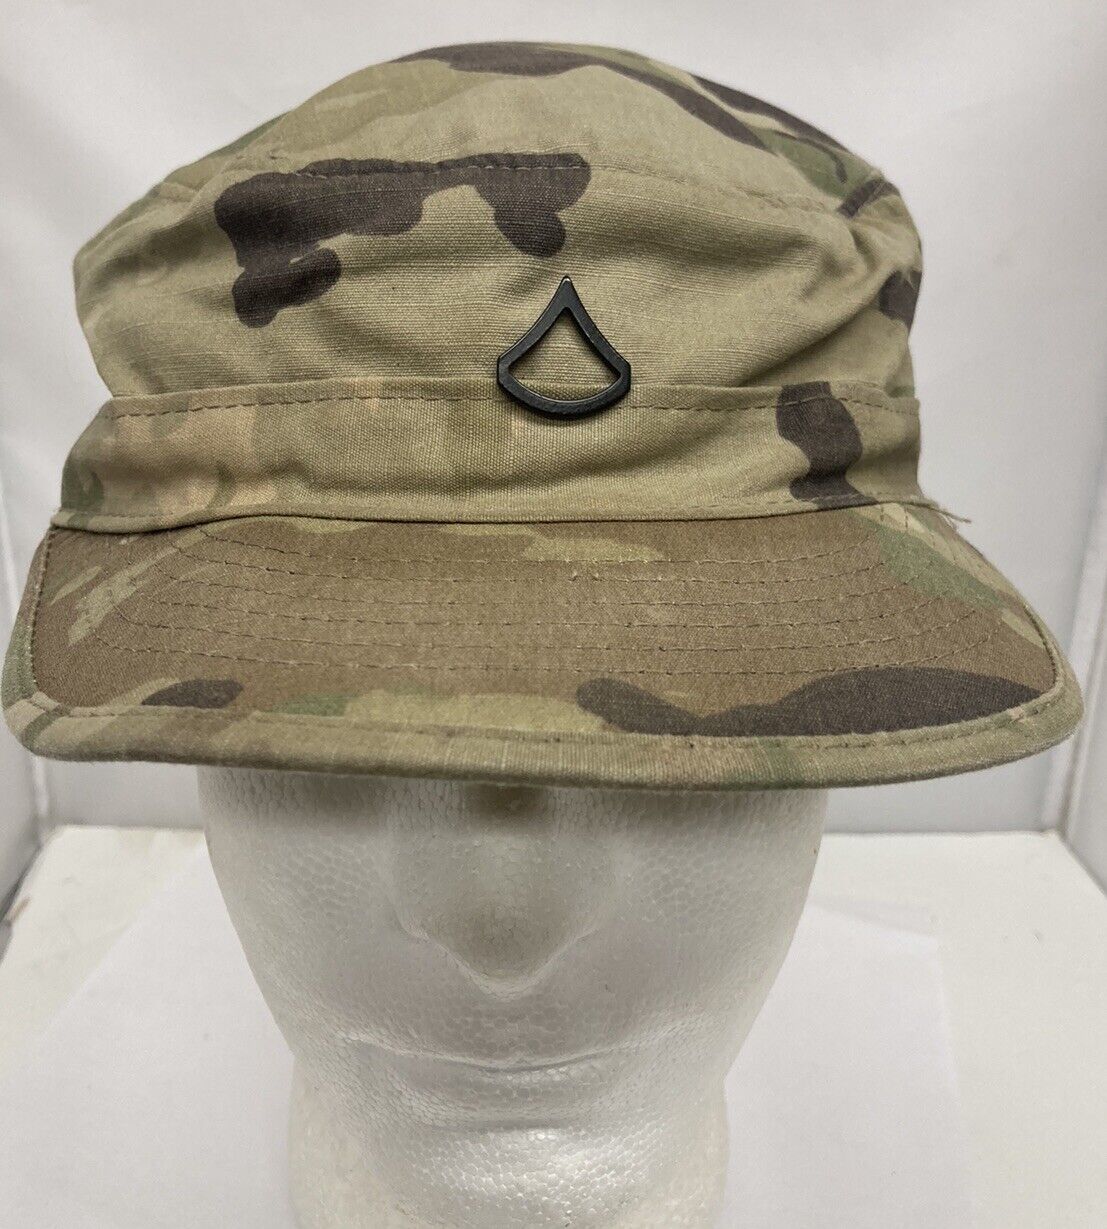 US Army Military Patrol Cap OCP \\ Ripstop NYCO 8415-01-630-8934 size 7 3/8